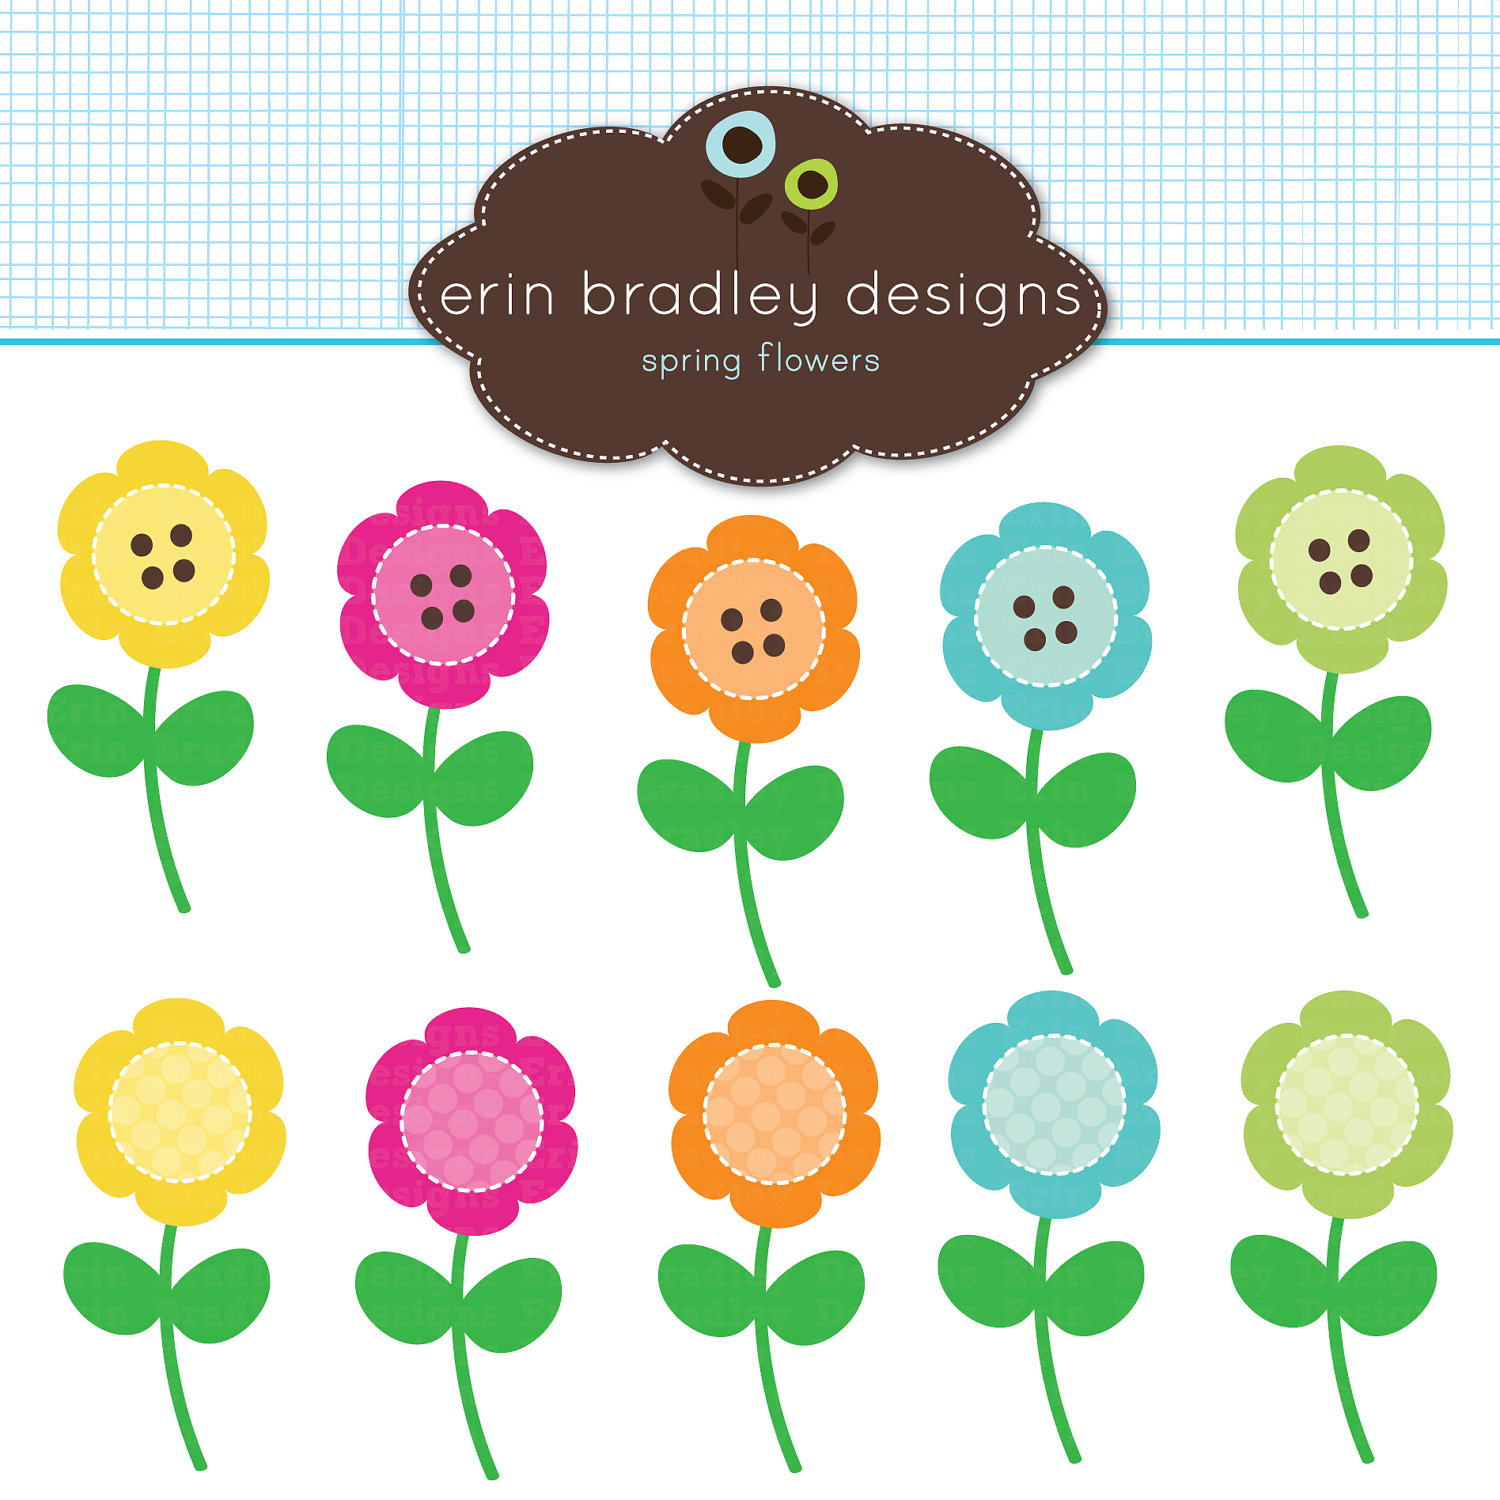 flower clipart free download - photo #28